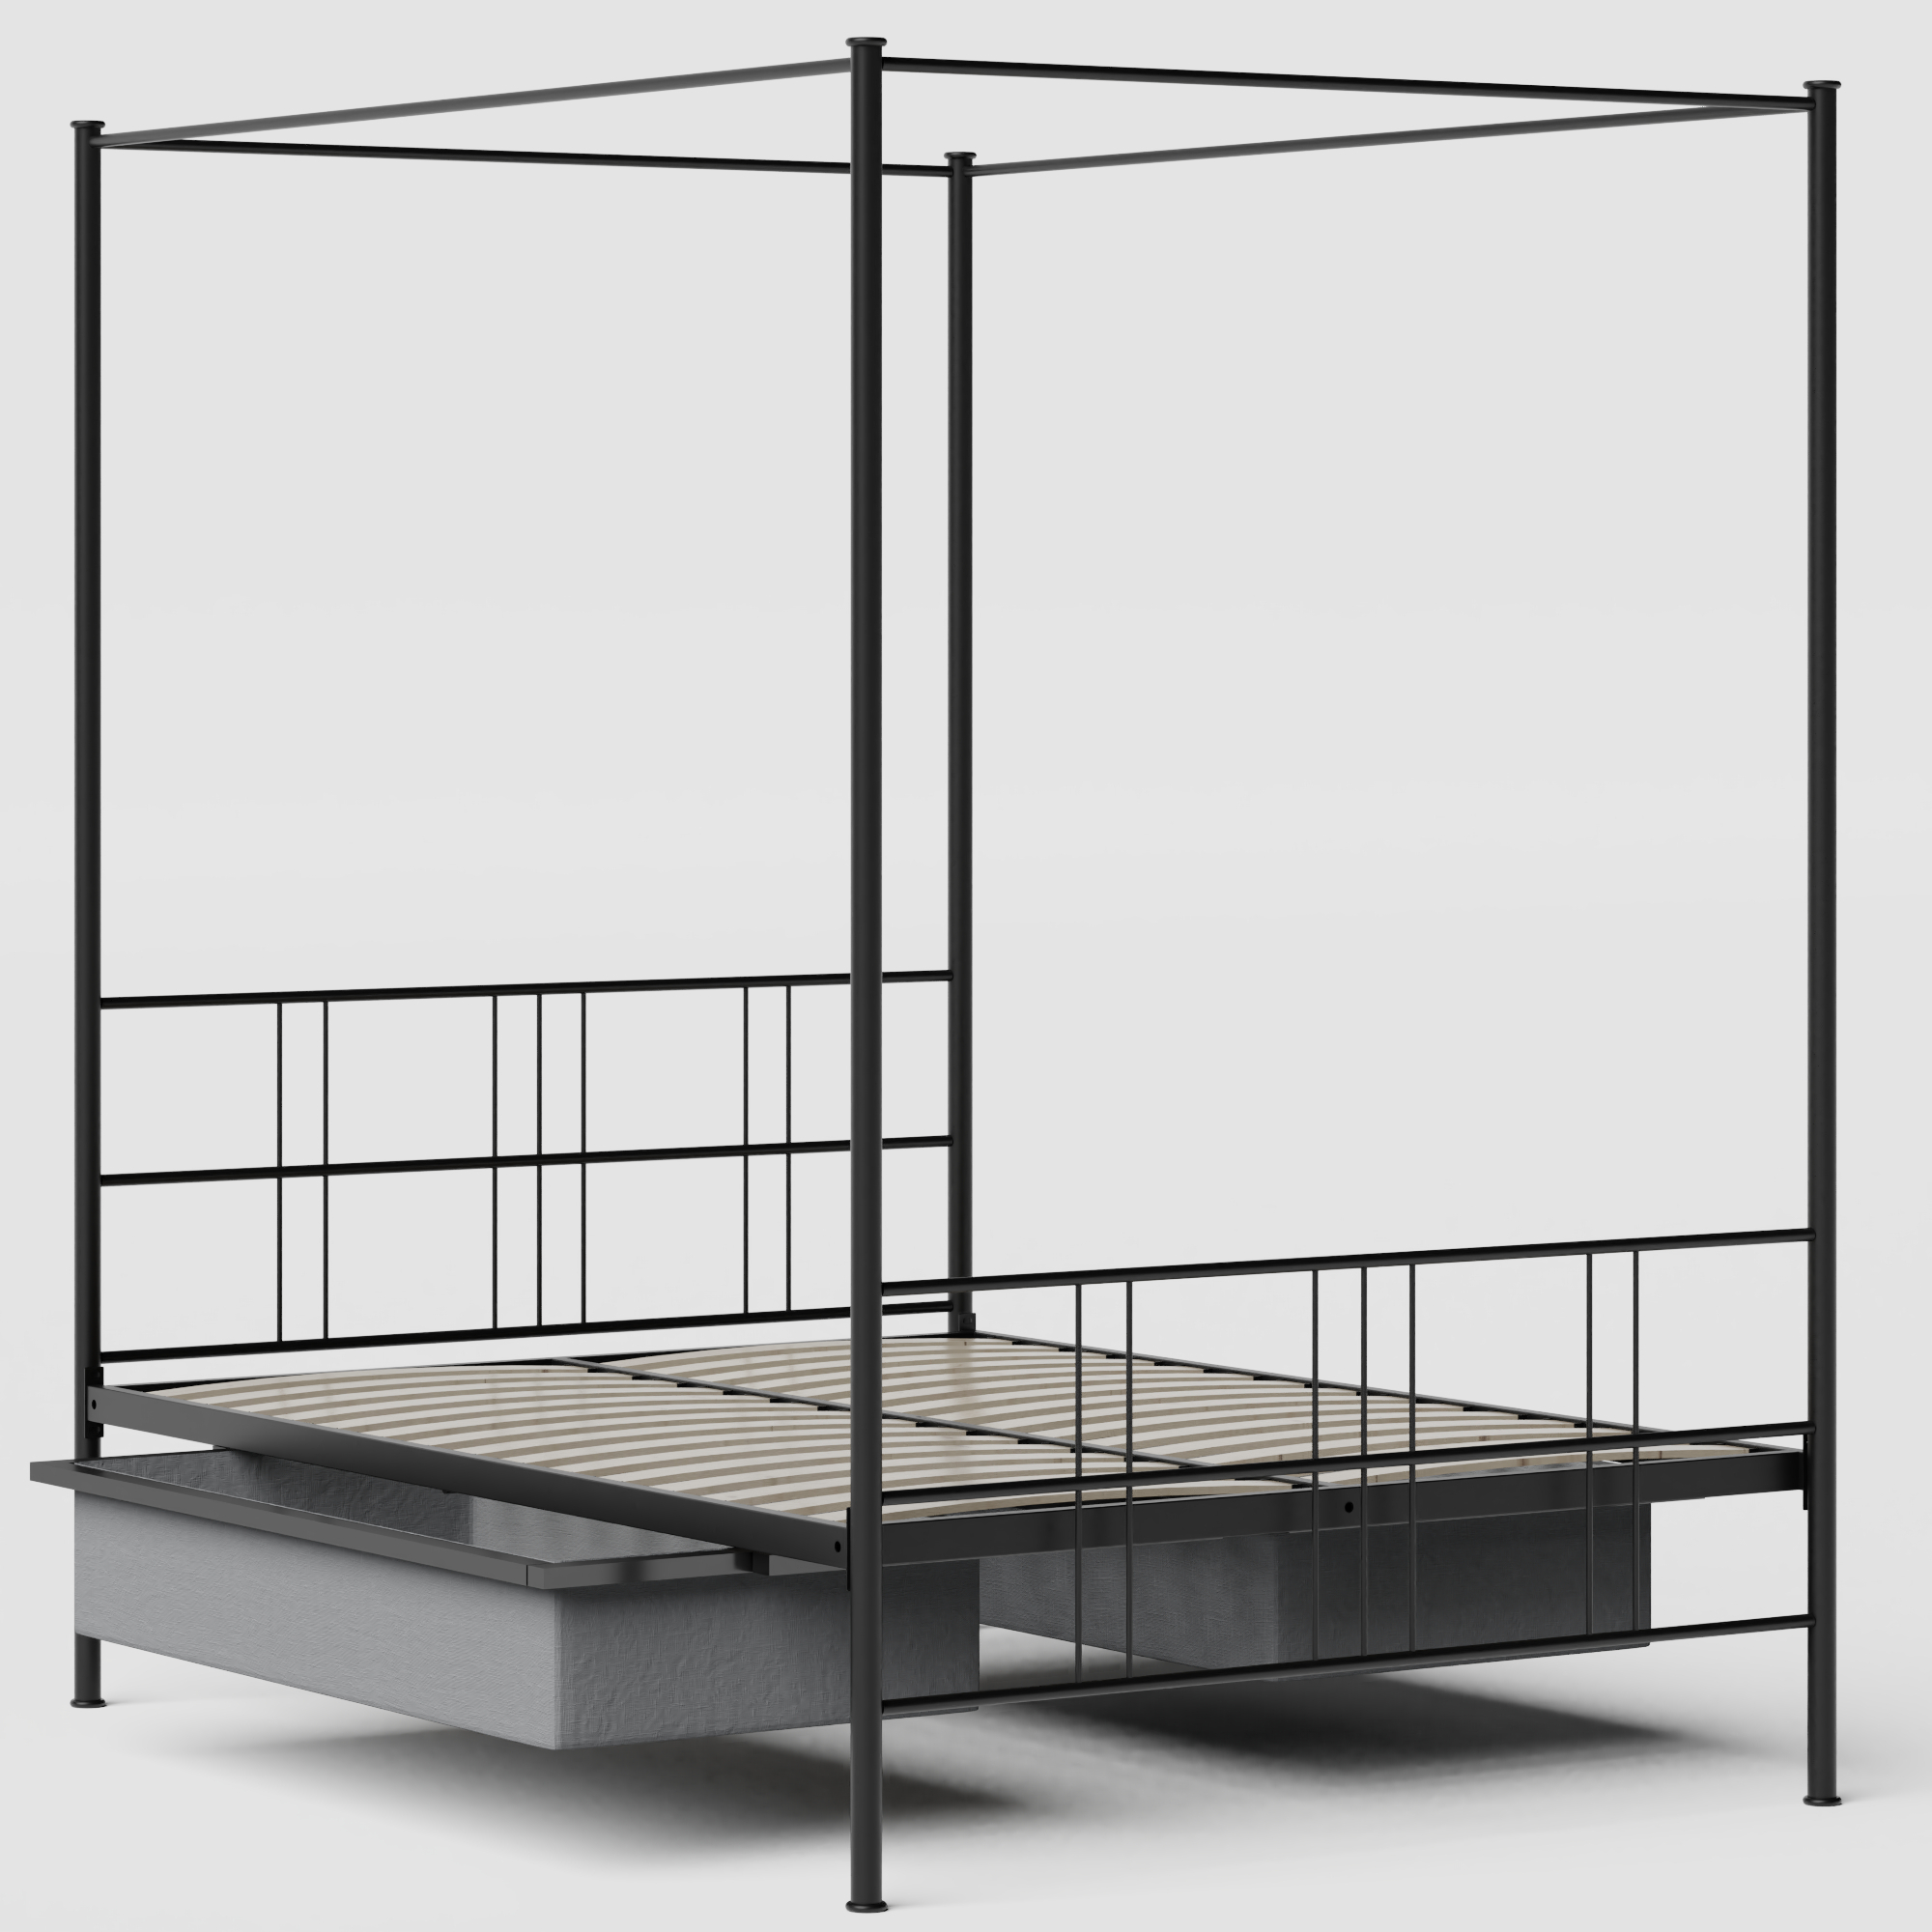 Toulon iron/metal bed in black with drawers